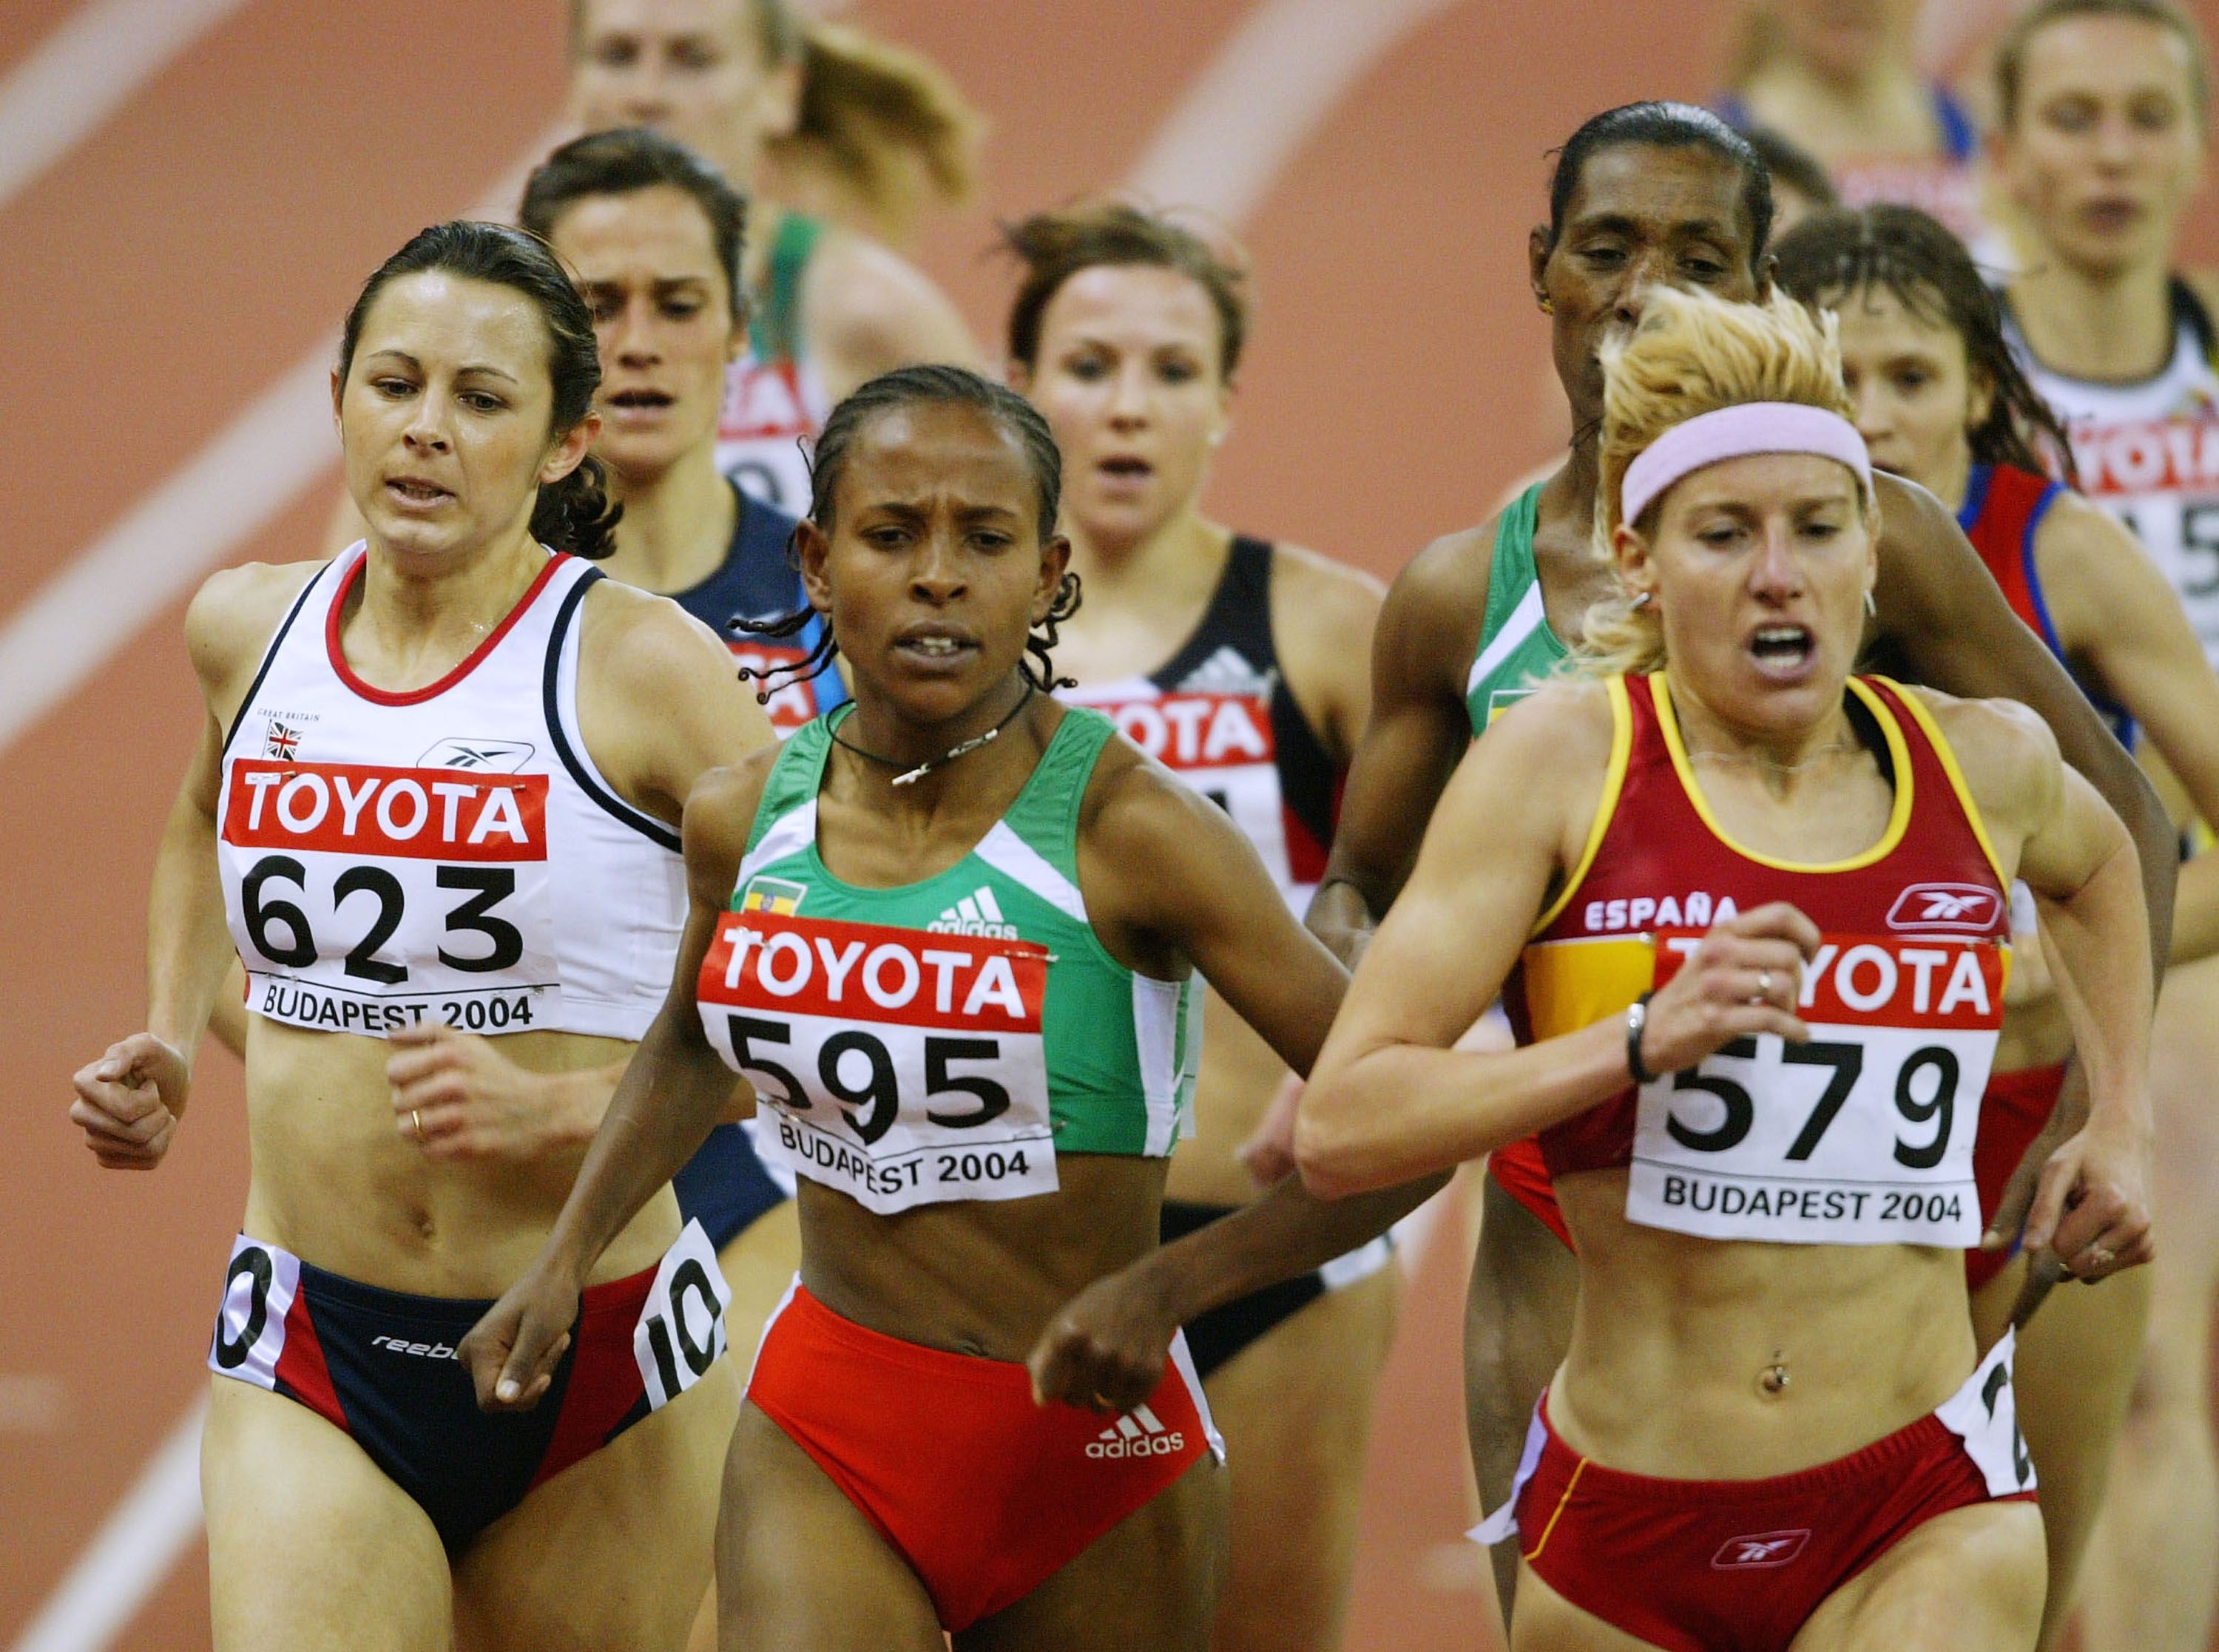 Meseret Defar in the 3000m at the 2004 World Indoor Championships in Budapest